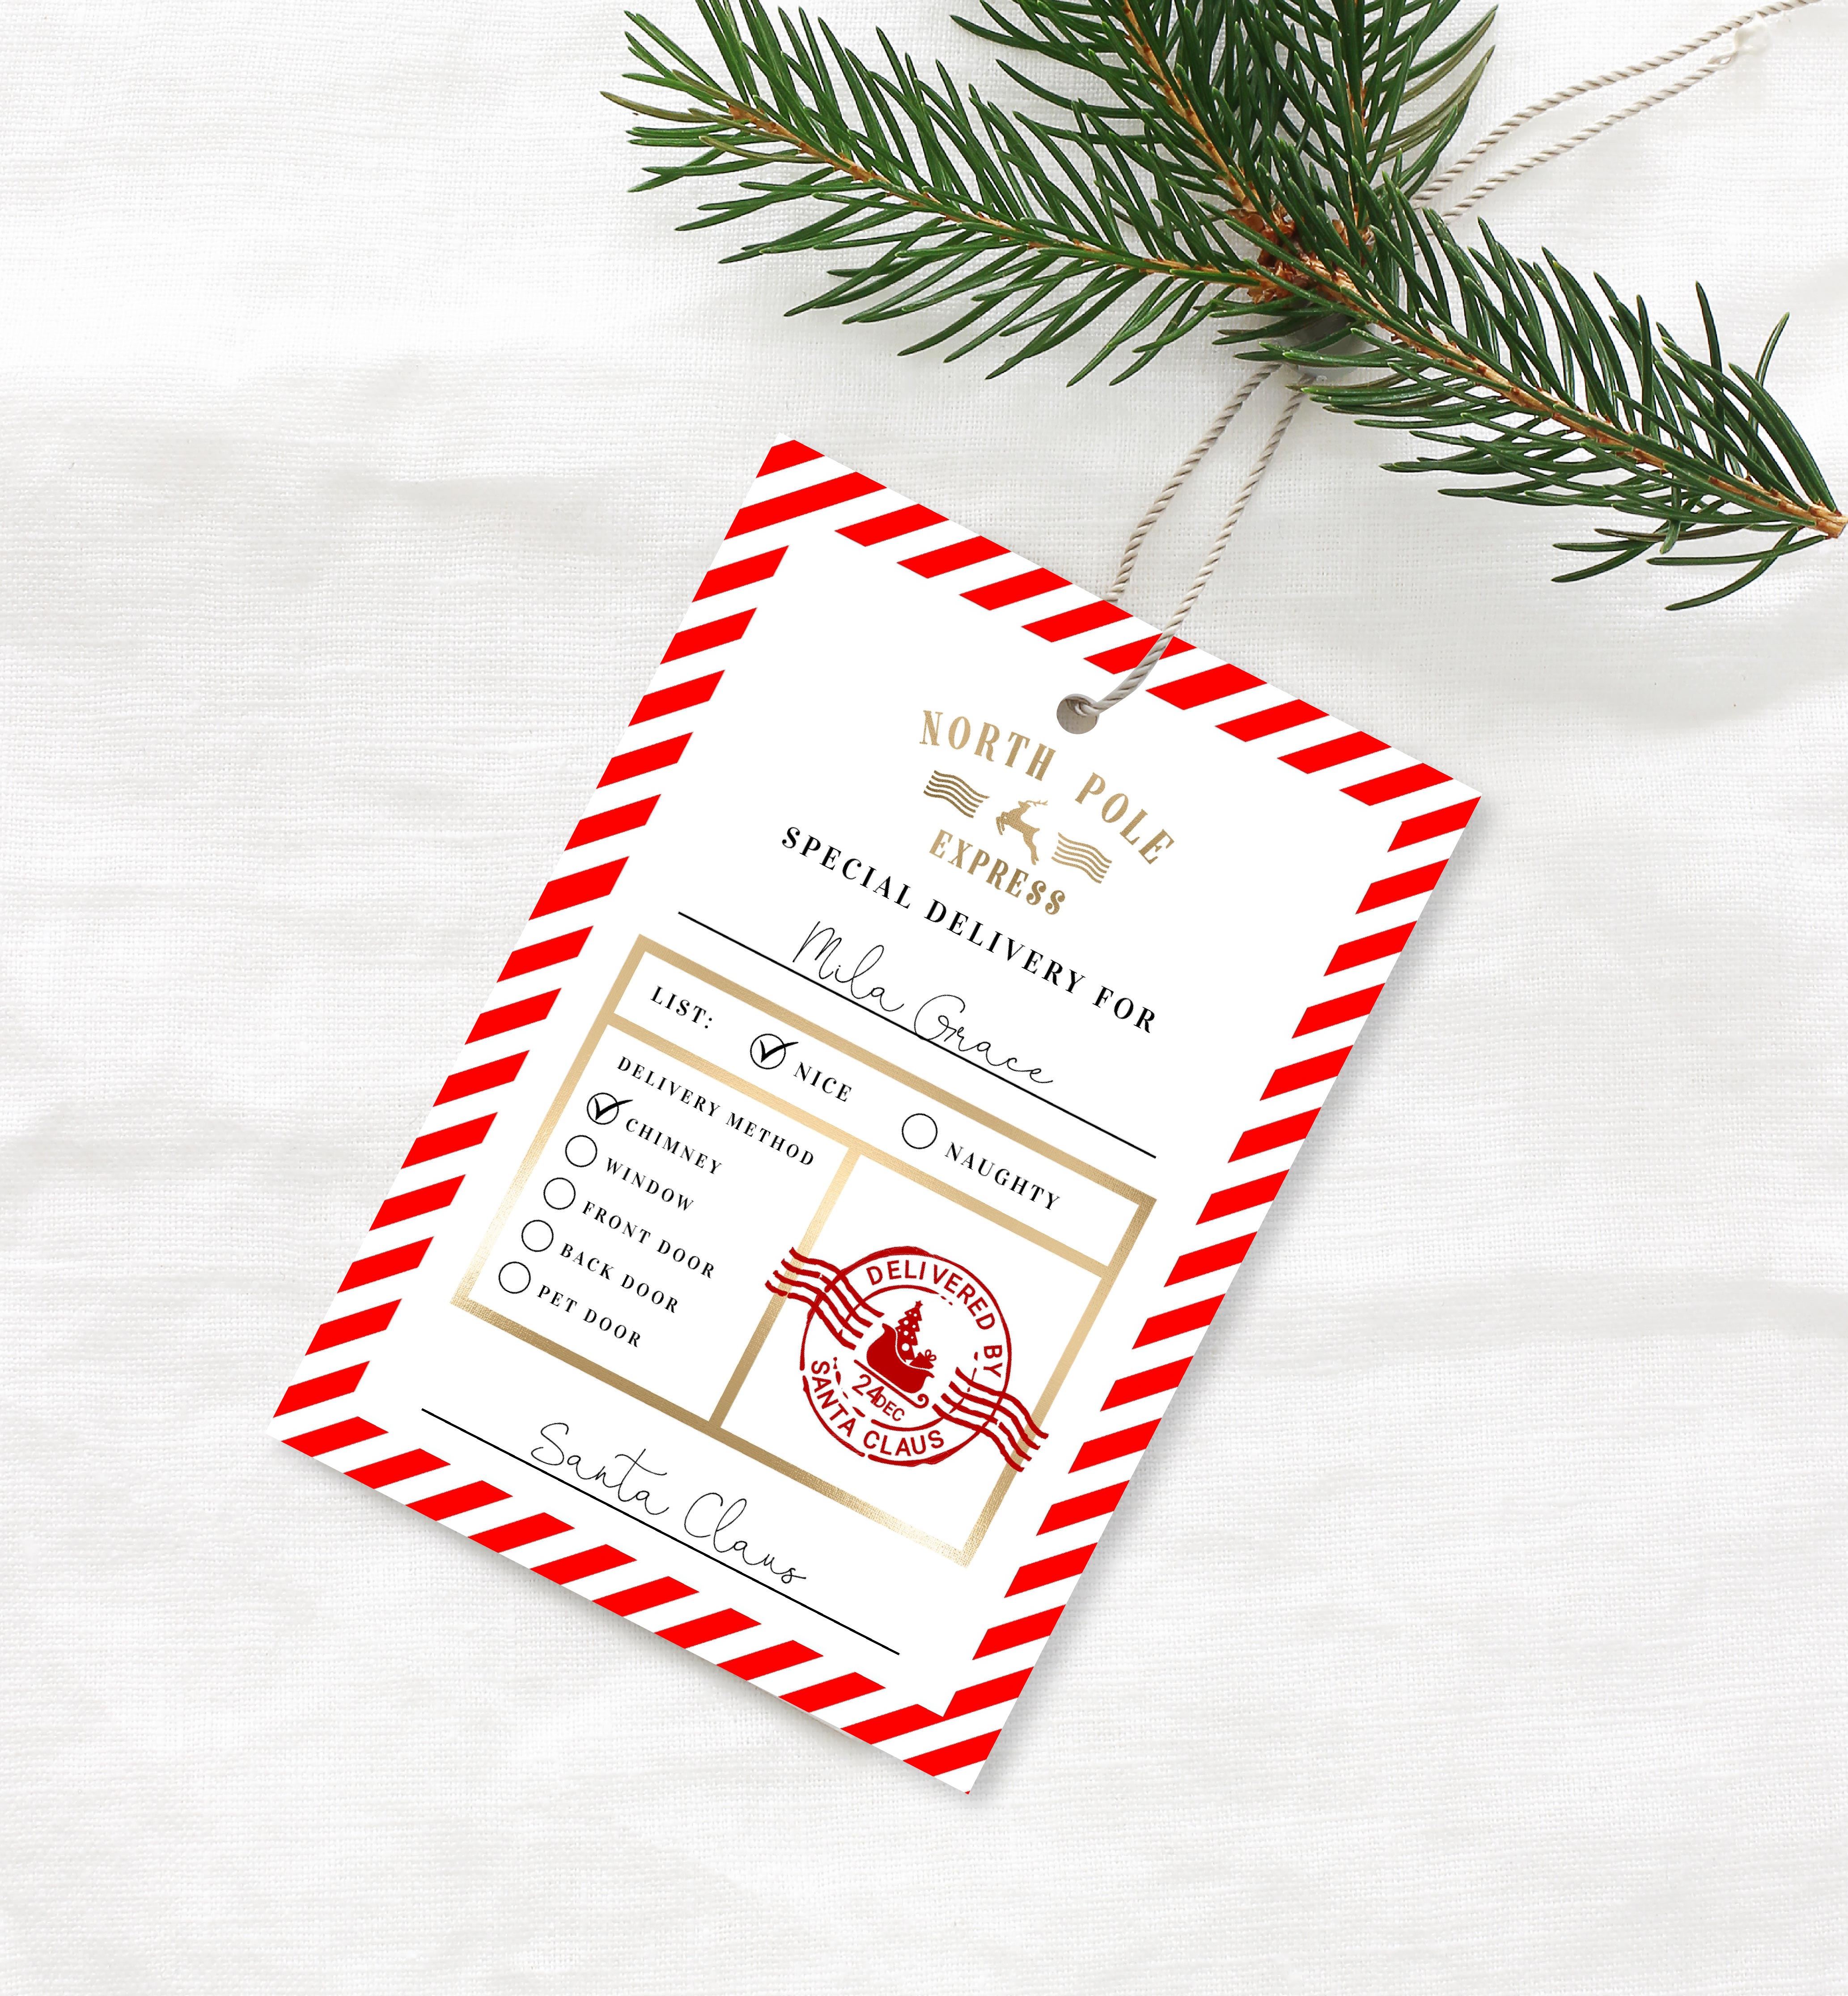 Christmas Name Tags Stickers Printable, North Pole Express Mail